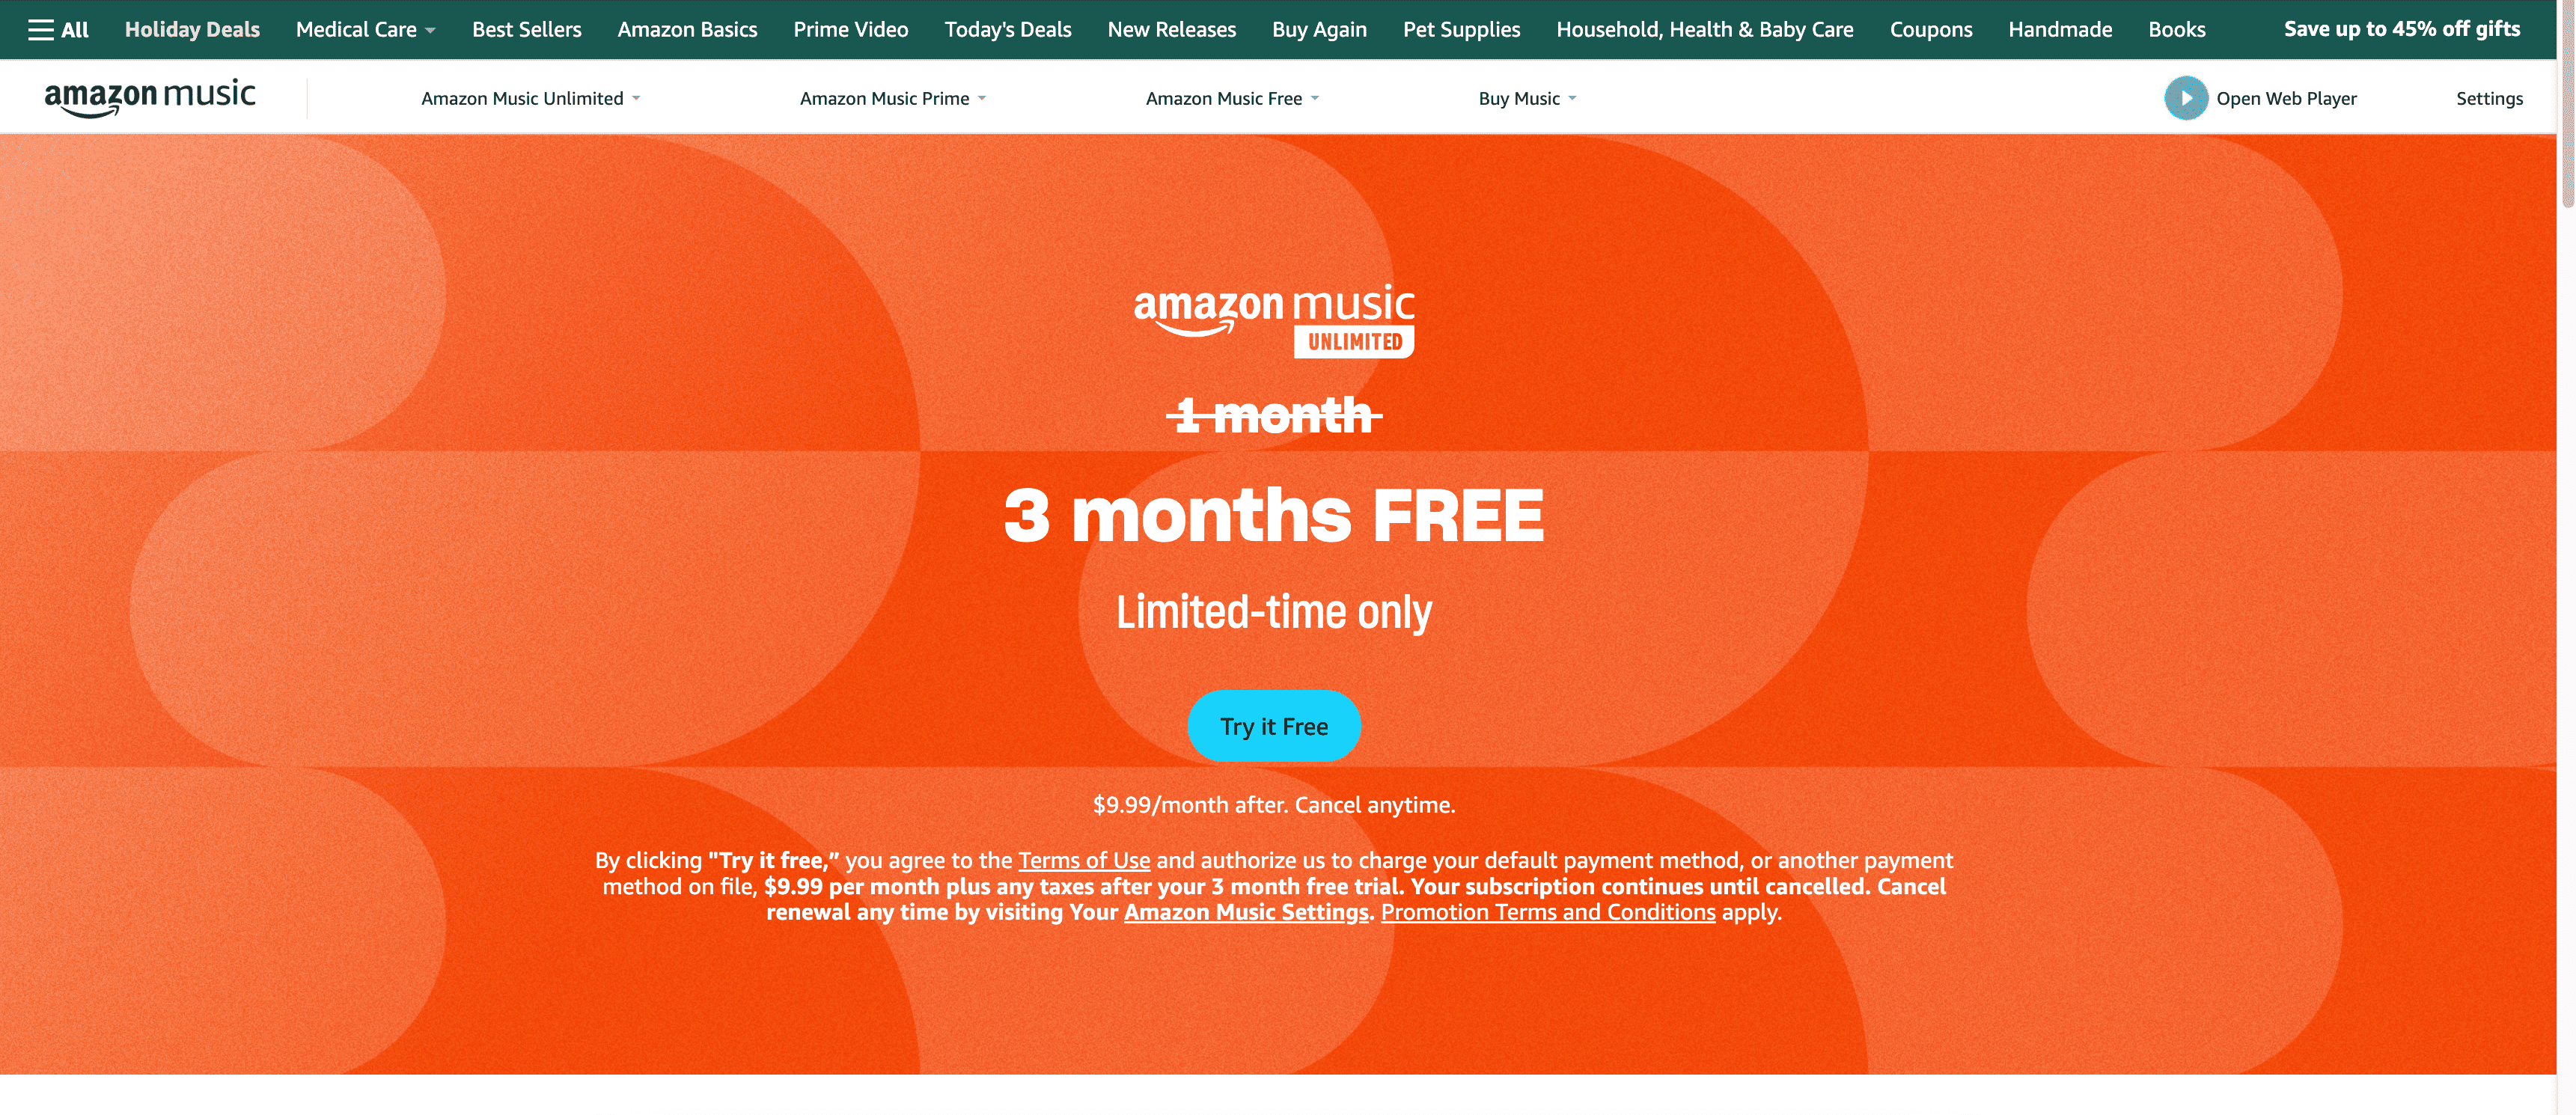 how to cancel amazon music, amazon music unlimited titles, amazon music unlimited plan, amazon music unlimited section